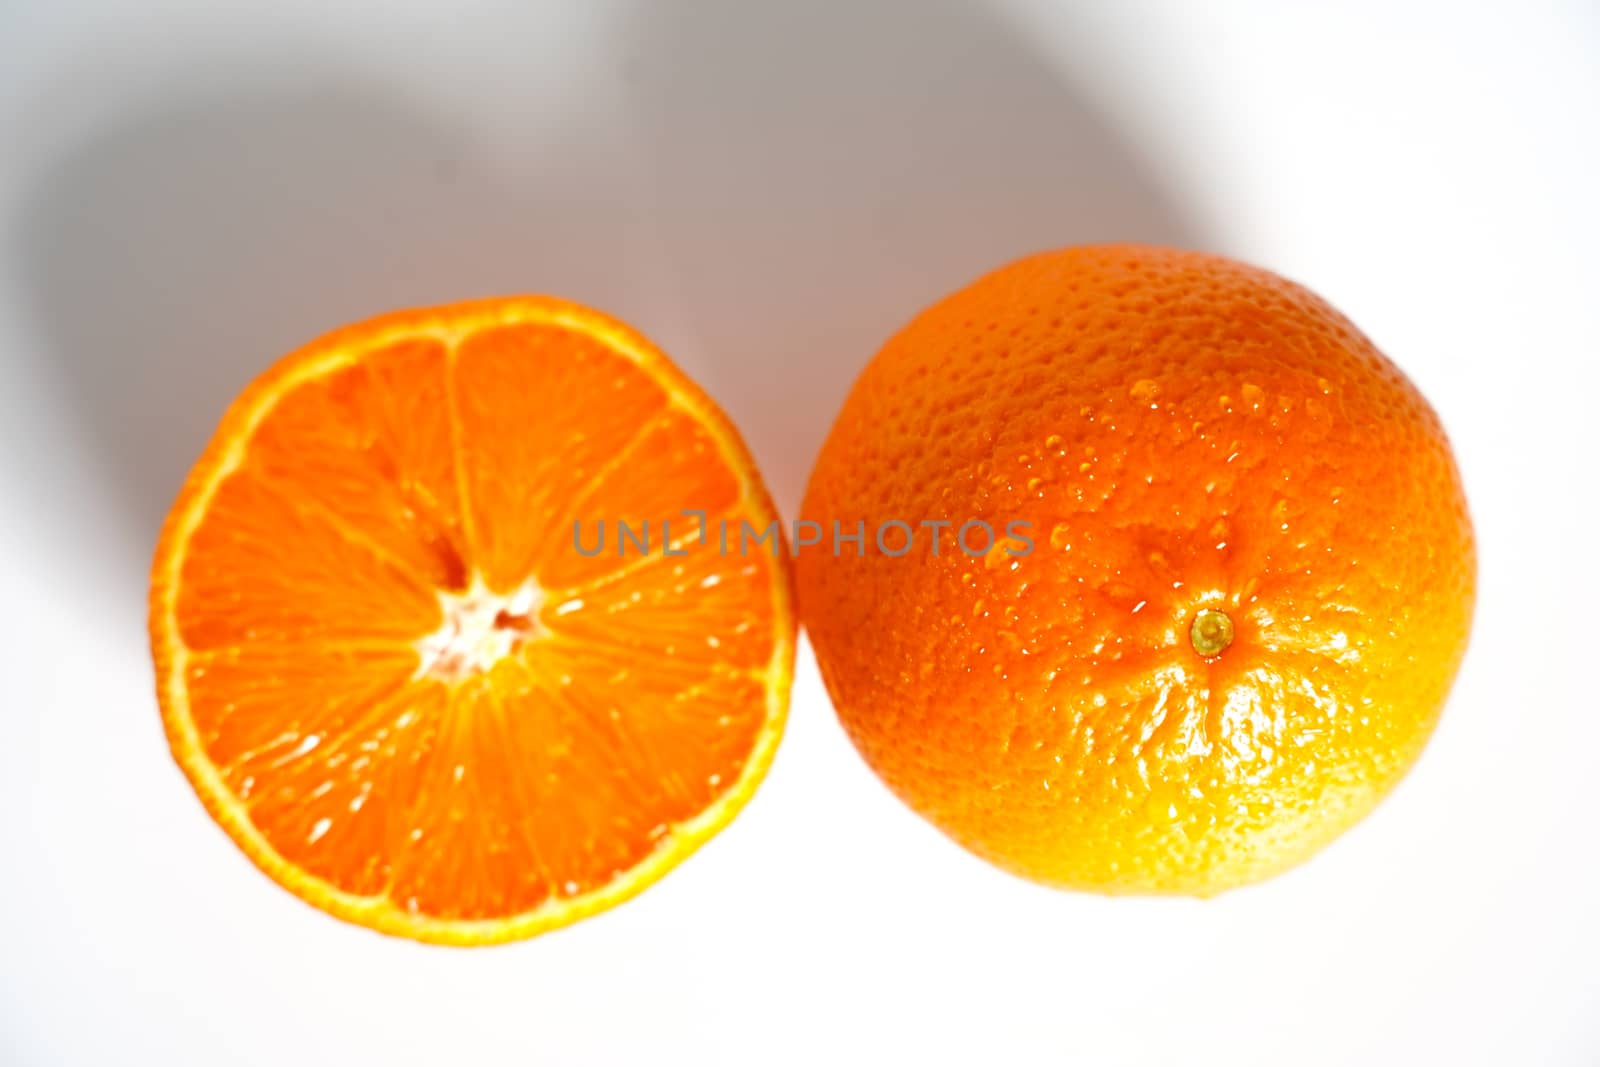 A Sliced Orange against a plain white background by samULvisuals